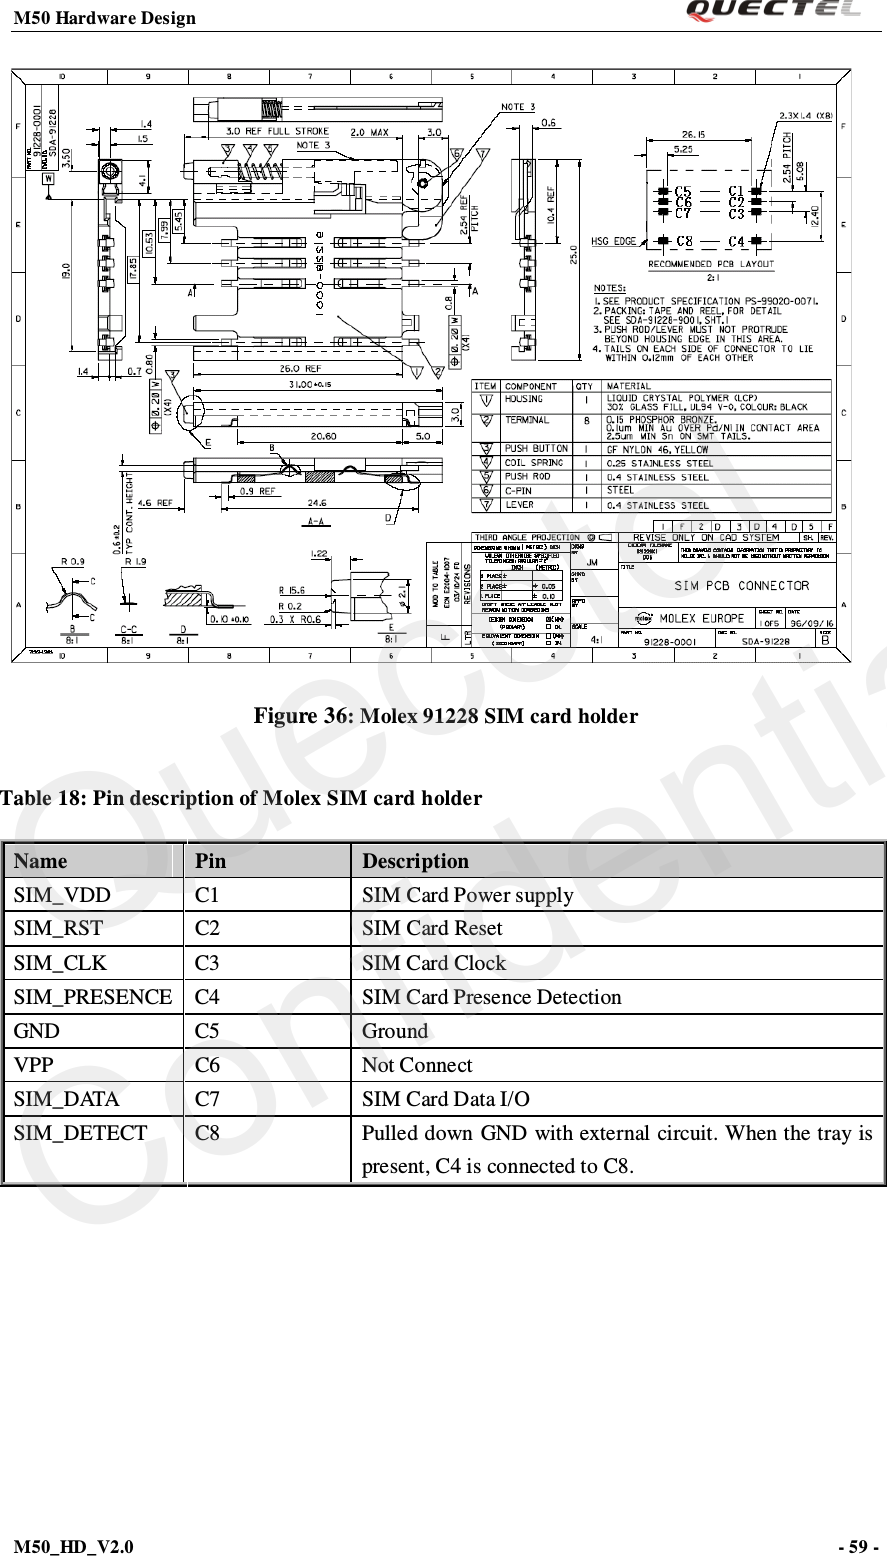 M50 Hardware Design                                                                M50_HD_V2.0                                                                      - 59 -    Figure 36: Molex 91228 SIM card holder Table 18: Pin description of Molex SIM card holder Name Pin Description SIM_VDD C1 SIM Card Power supply SIM_RST C2 SIM Card Reset SIM_CLK C3 SIM Card Clock SIM_PRESENCE C4 SIM Card Presence Detection GND C5 Ground VPP C6 Not Connect S I M _ D ATA  C7 SIM Card Data I/O SIM_DETECT C8 Pulled down GND with external circuit. When the tray is present, C4 is connected to C8.   Quecctel Confidential